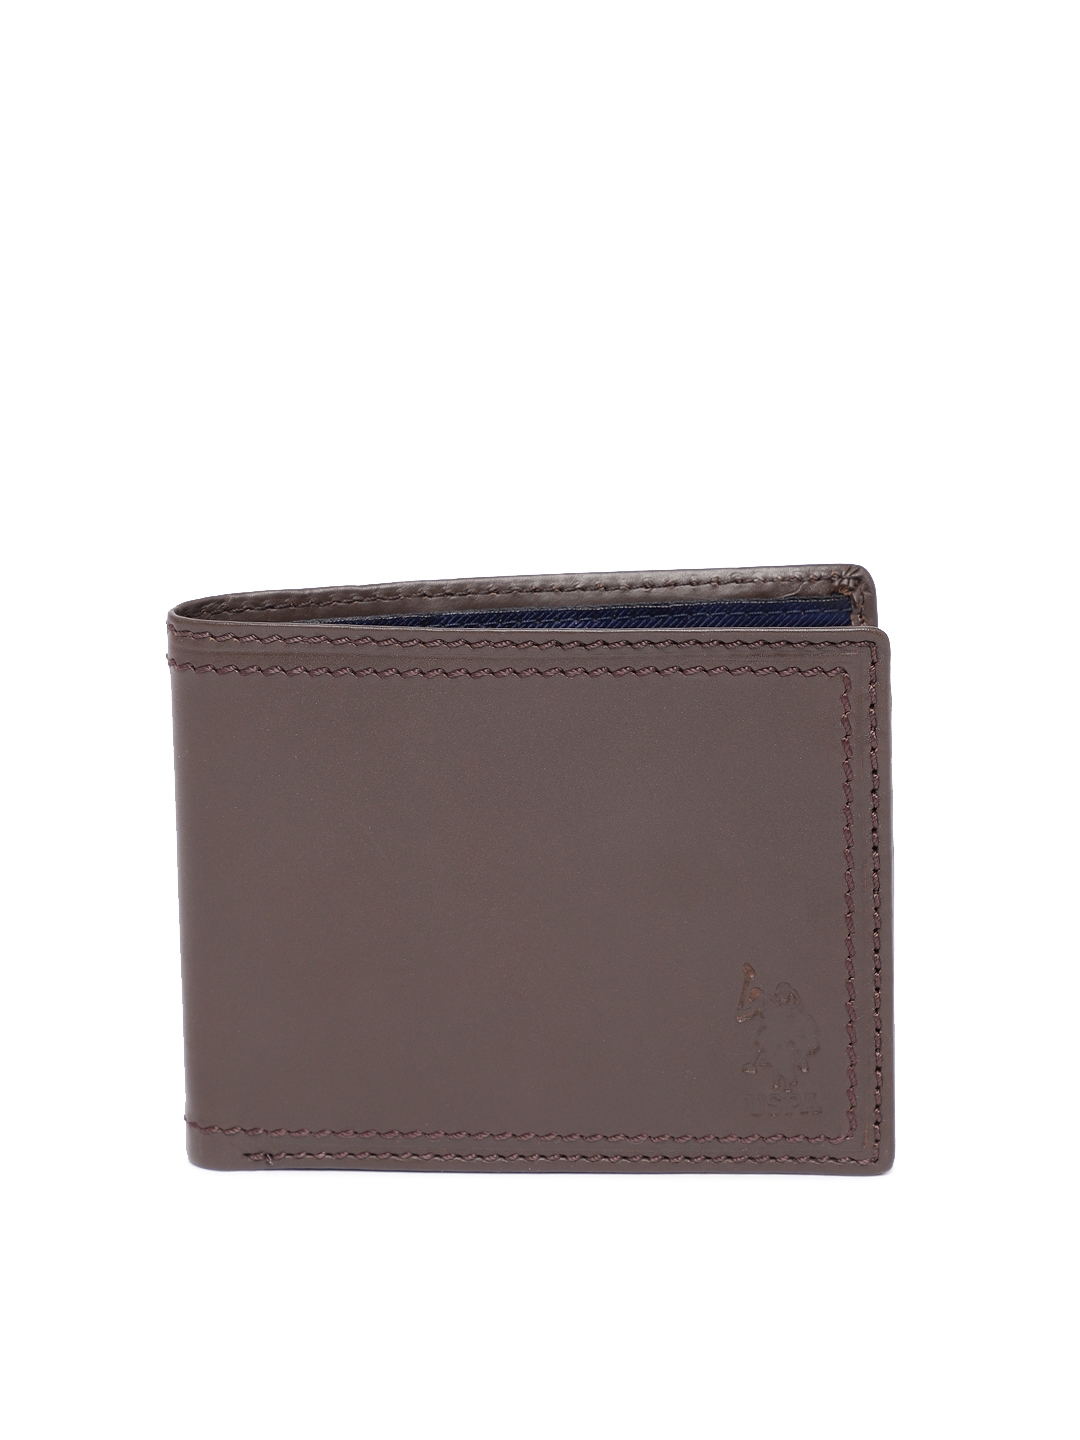 Buy U.S. Polo Assn. Men Brown Solid Leather Two Fold Wallet - Wallets ...